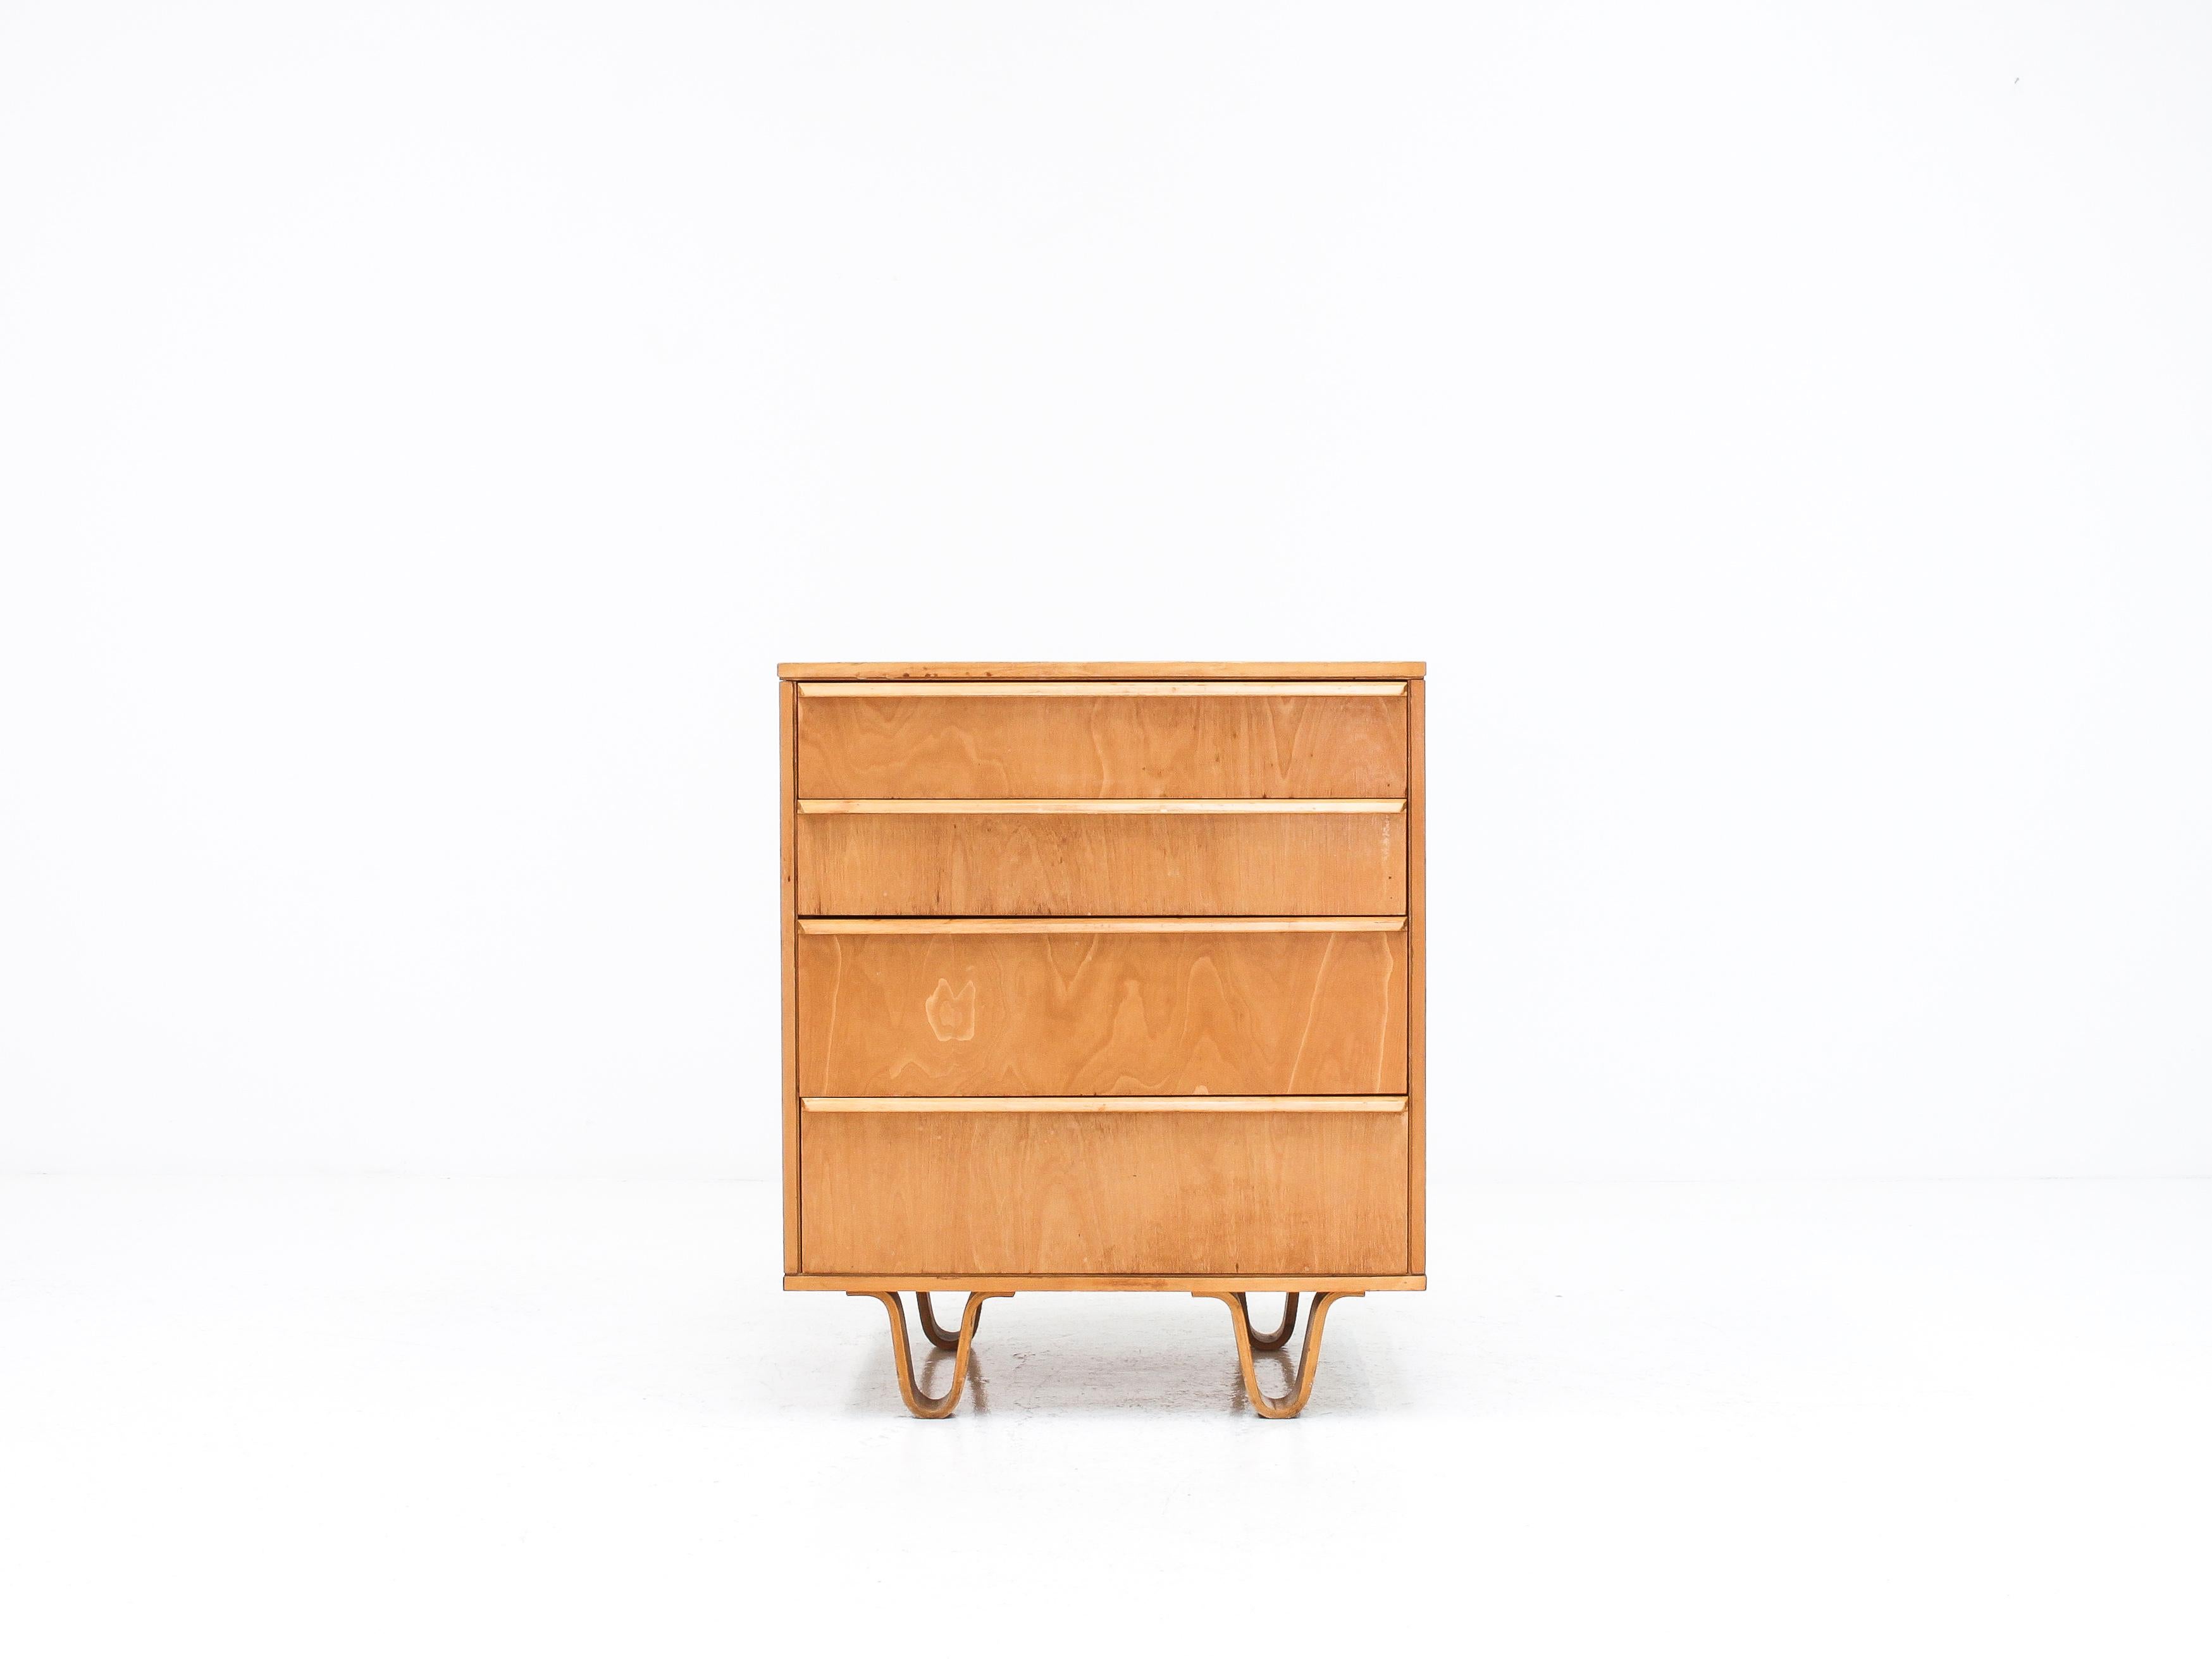 A Cees Braakman CB05 Birch chest of drawers for UMS Pastoe, designed 1952, Netherlands.

A Cees Braakman designed CB05 birch chest of drawers, part of the Combex range. Consisting of 4 shelves and also the Cees Braakman signature design feature